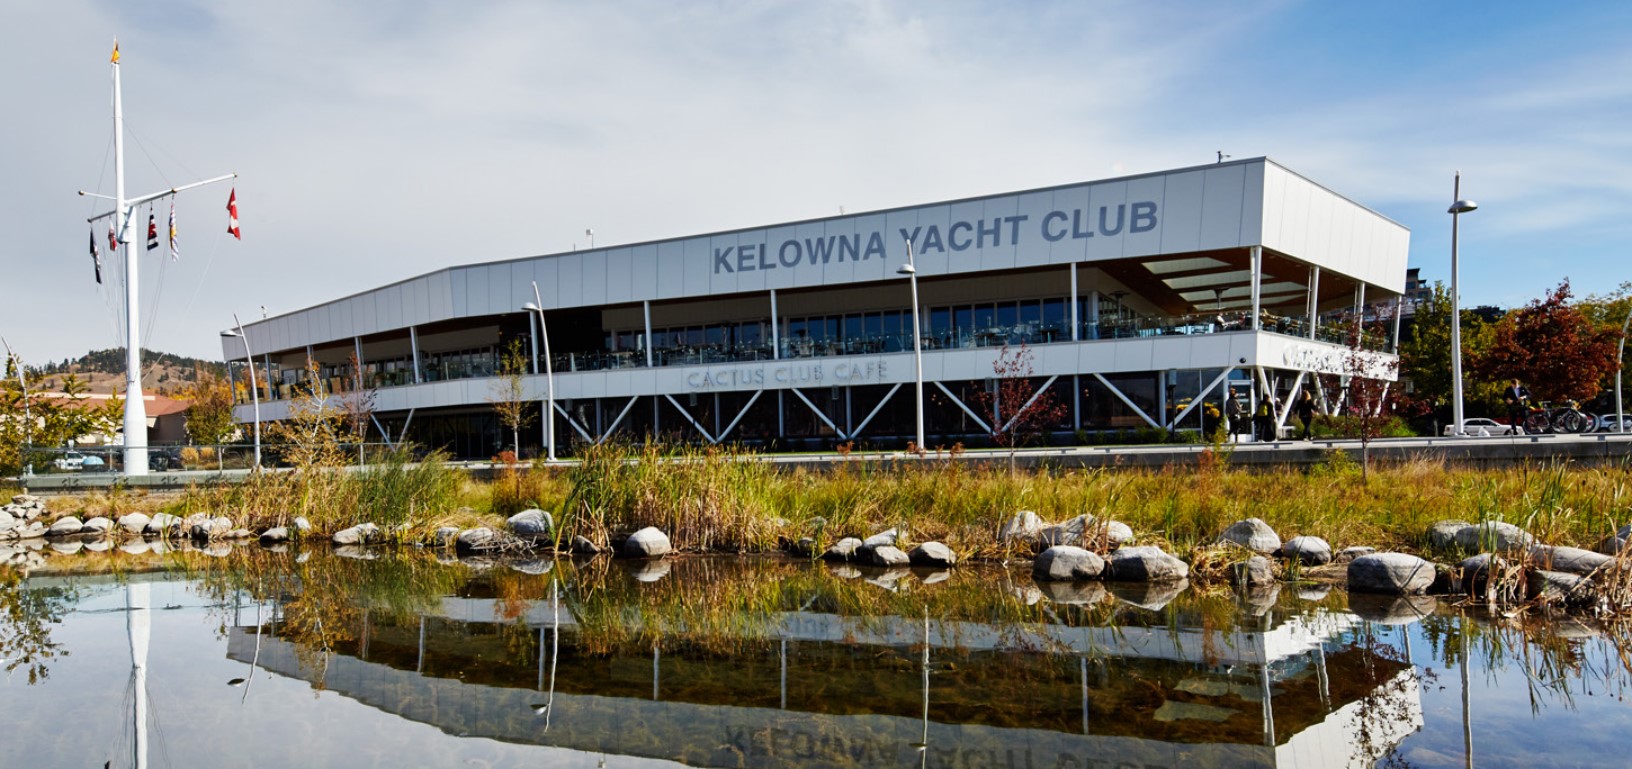 http://Kelowna%20Yacht%20Club%20Electrical%20engineering%20project